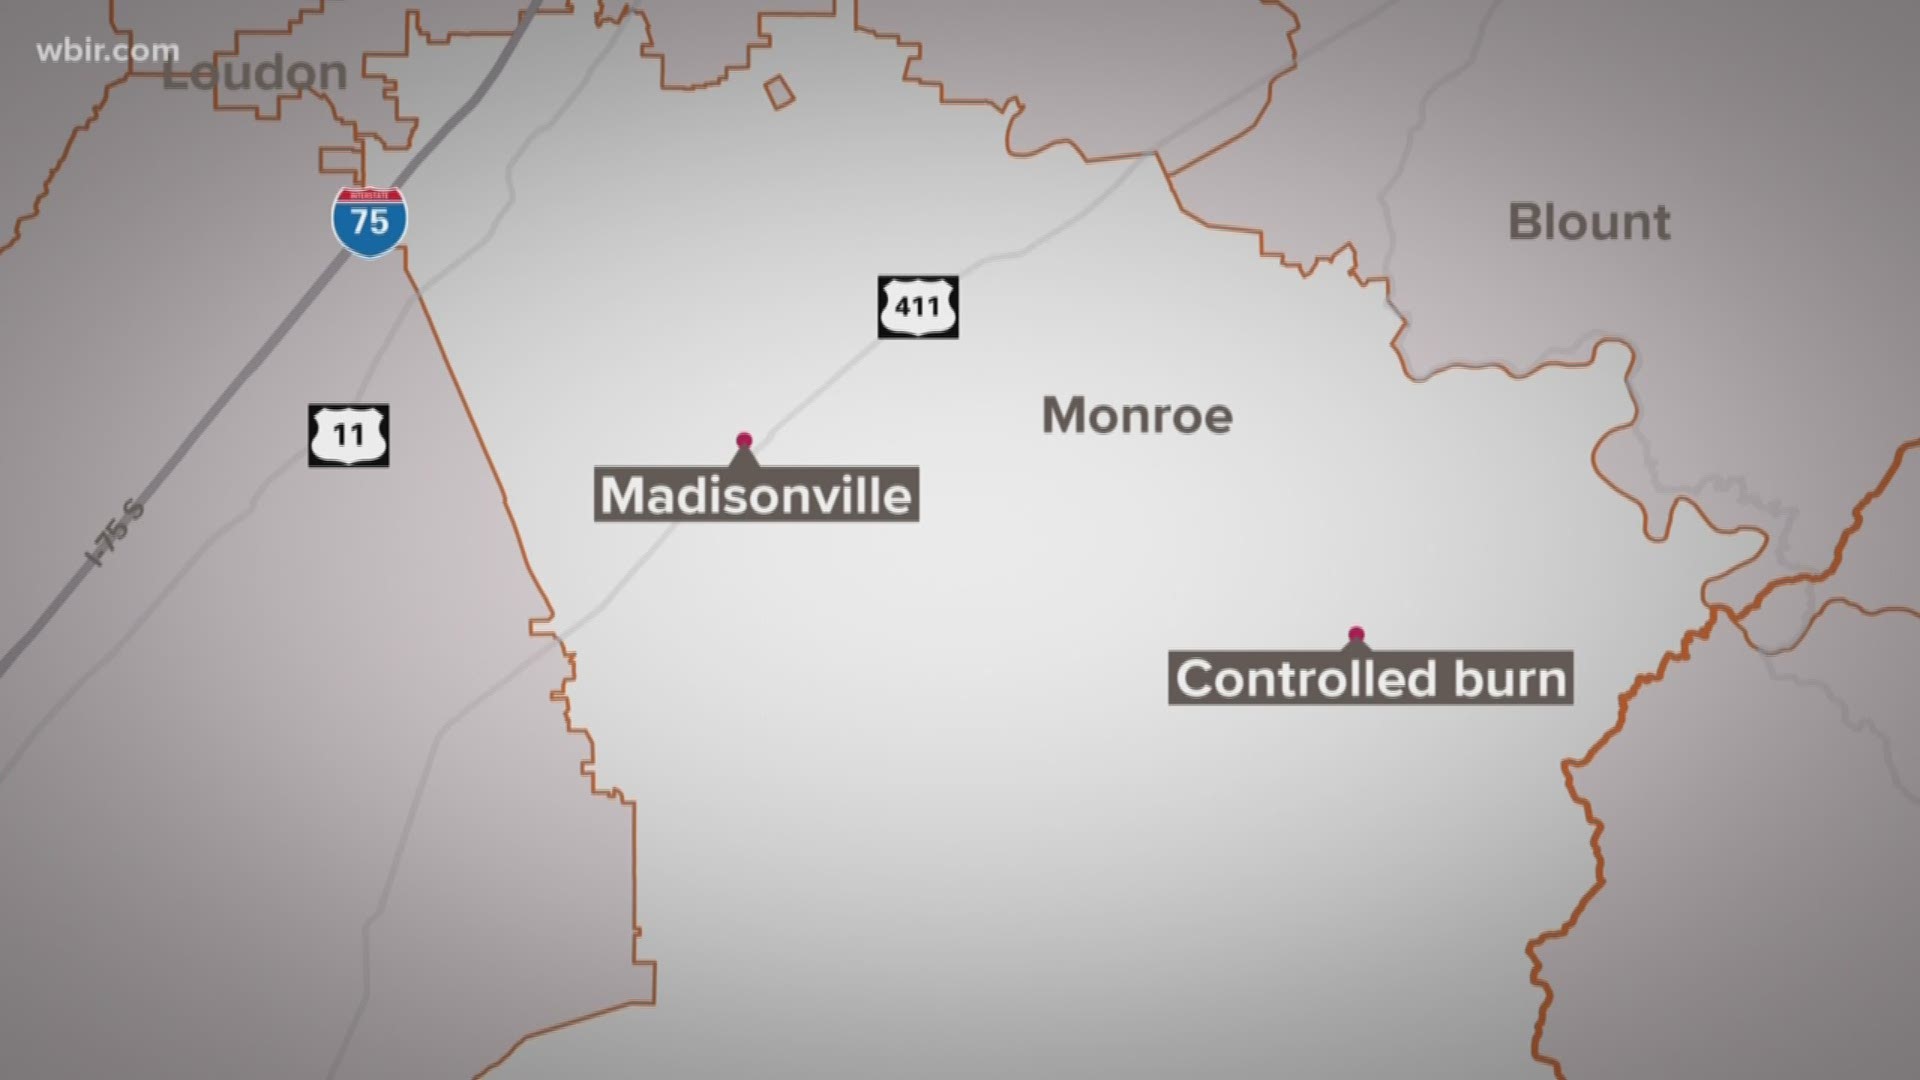 Authorities burned more than 700 acres of the Cherokee National Forest in Monroe County, and the burn is scheduled to last through June 1.